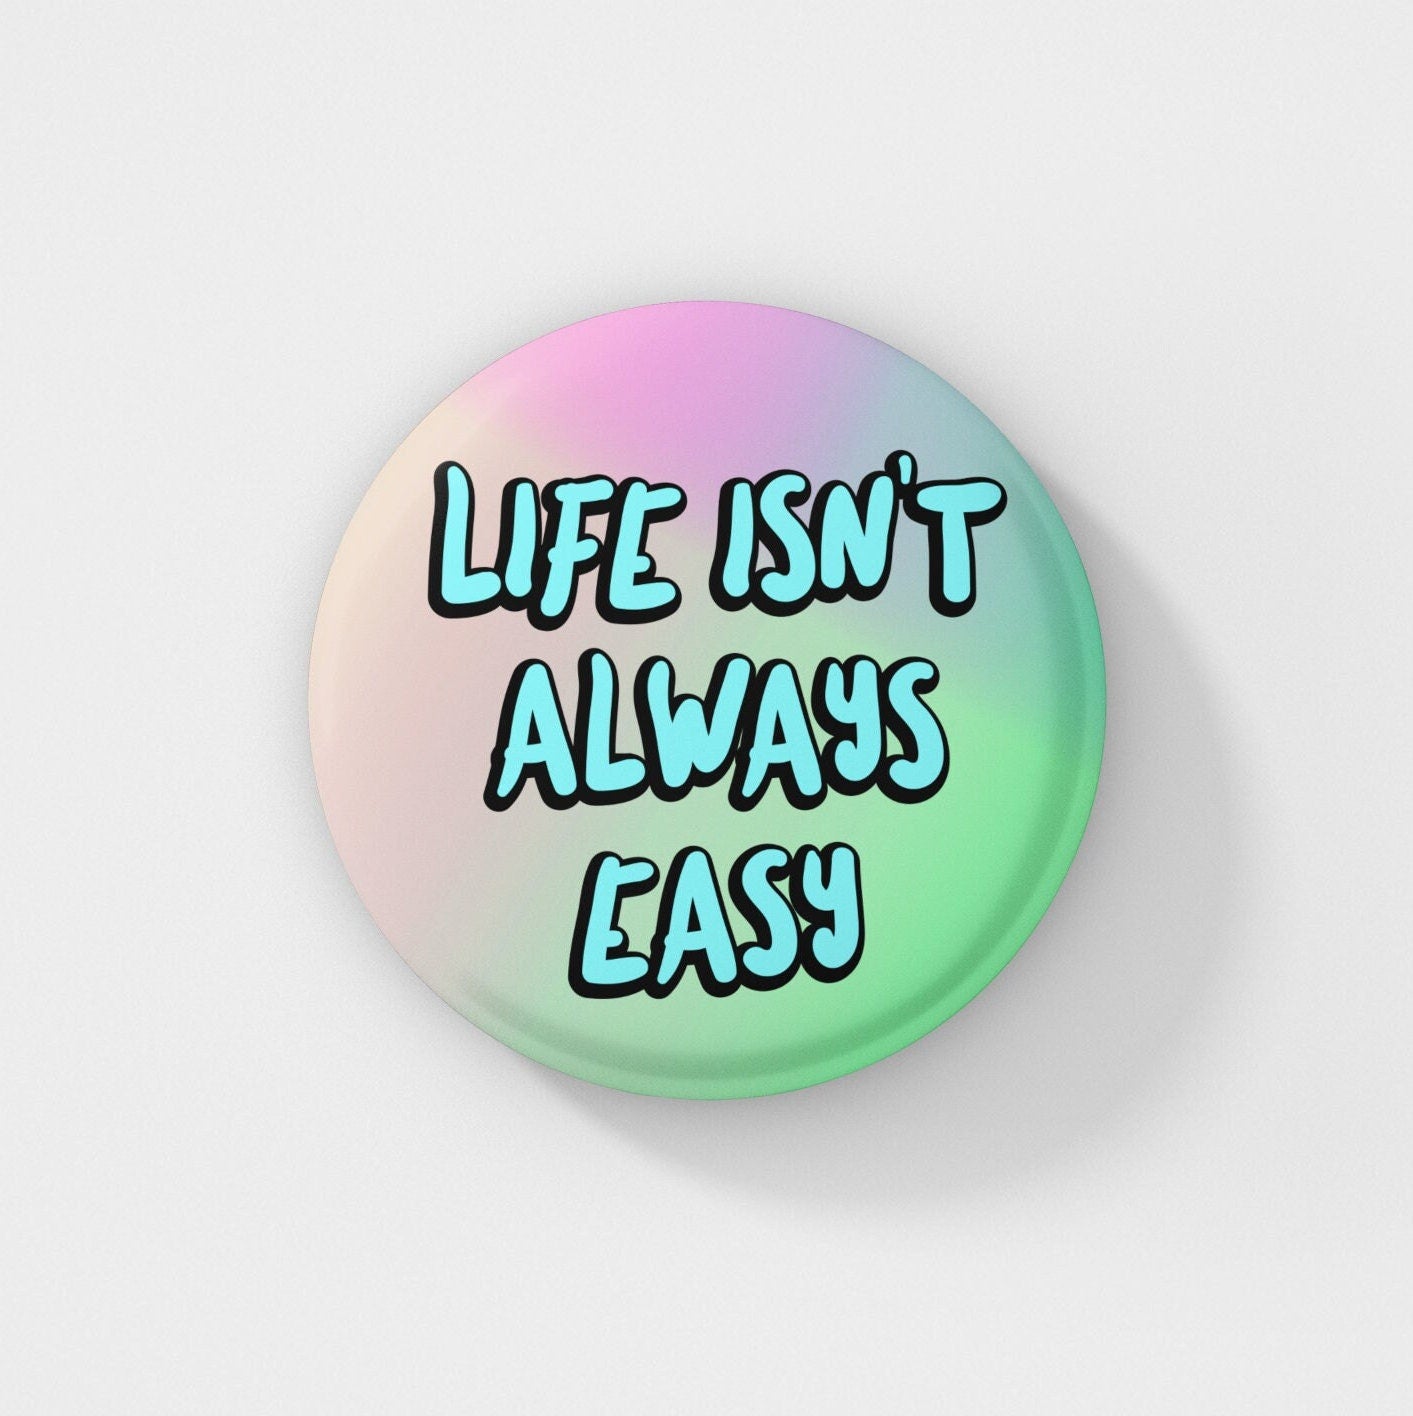 Life Isn't Always Easy - Pin Badge | Positive Pins, Mental Health Gift, Motivational Gifts